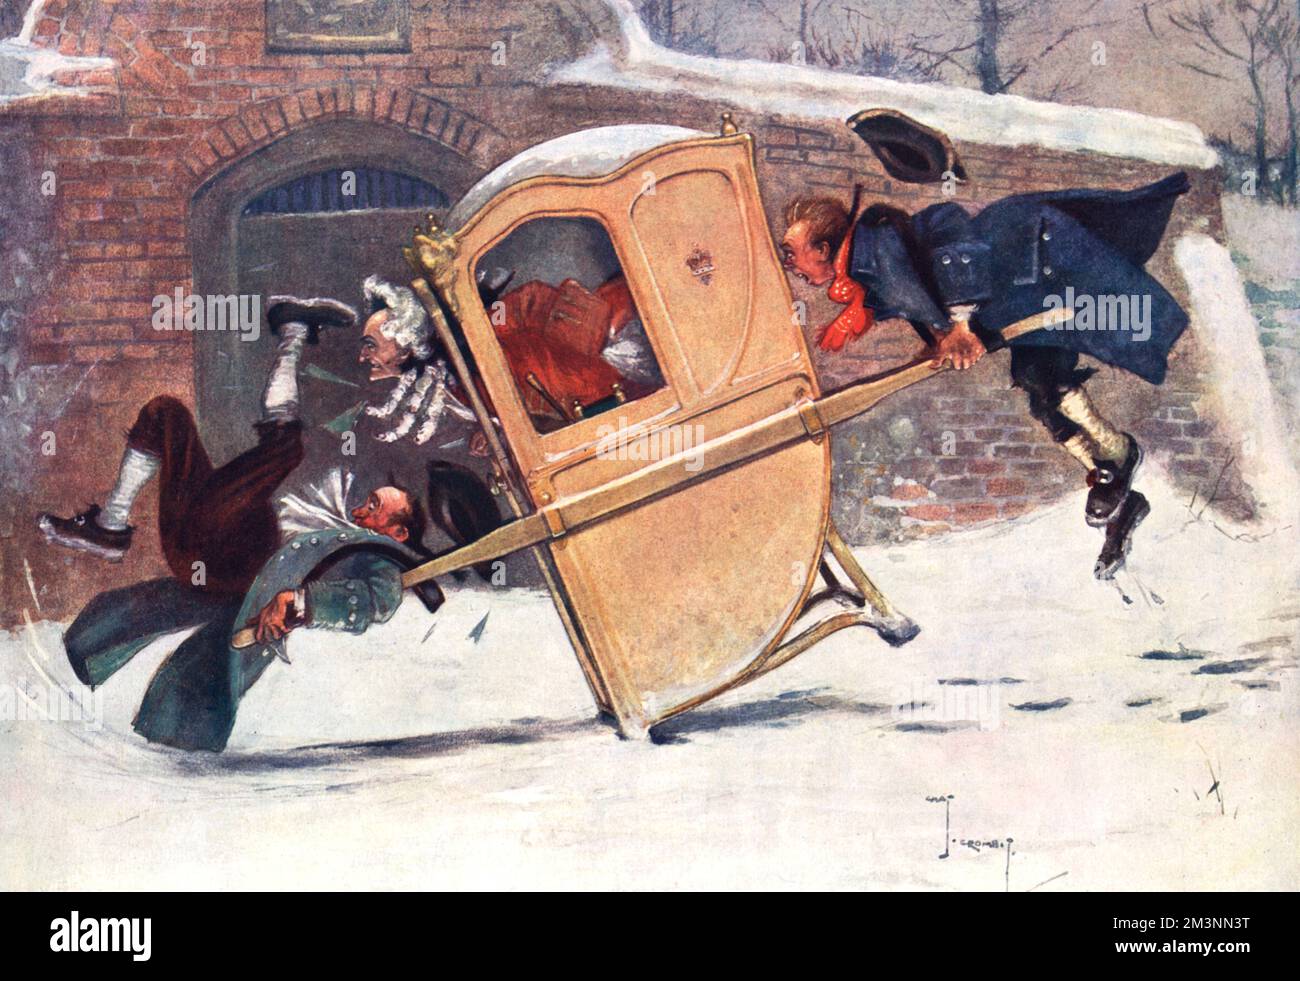 Humorous illustration by Charles Crombie entitled, The Path to Home!  God Rest Ye Merry Gentlemen!  Let Nothing You Dismay!.  Two men carrying a sedan chair slip on the snow, leaving their passenger rather bumped and bruised.     Date: 1911 Stock Photo